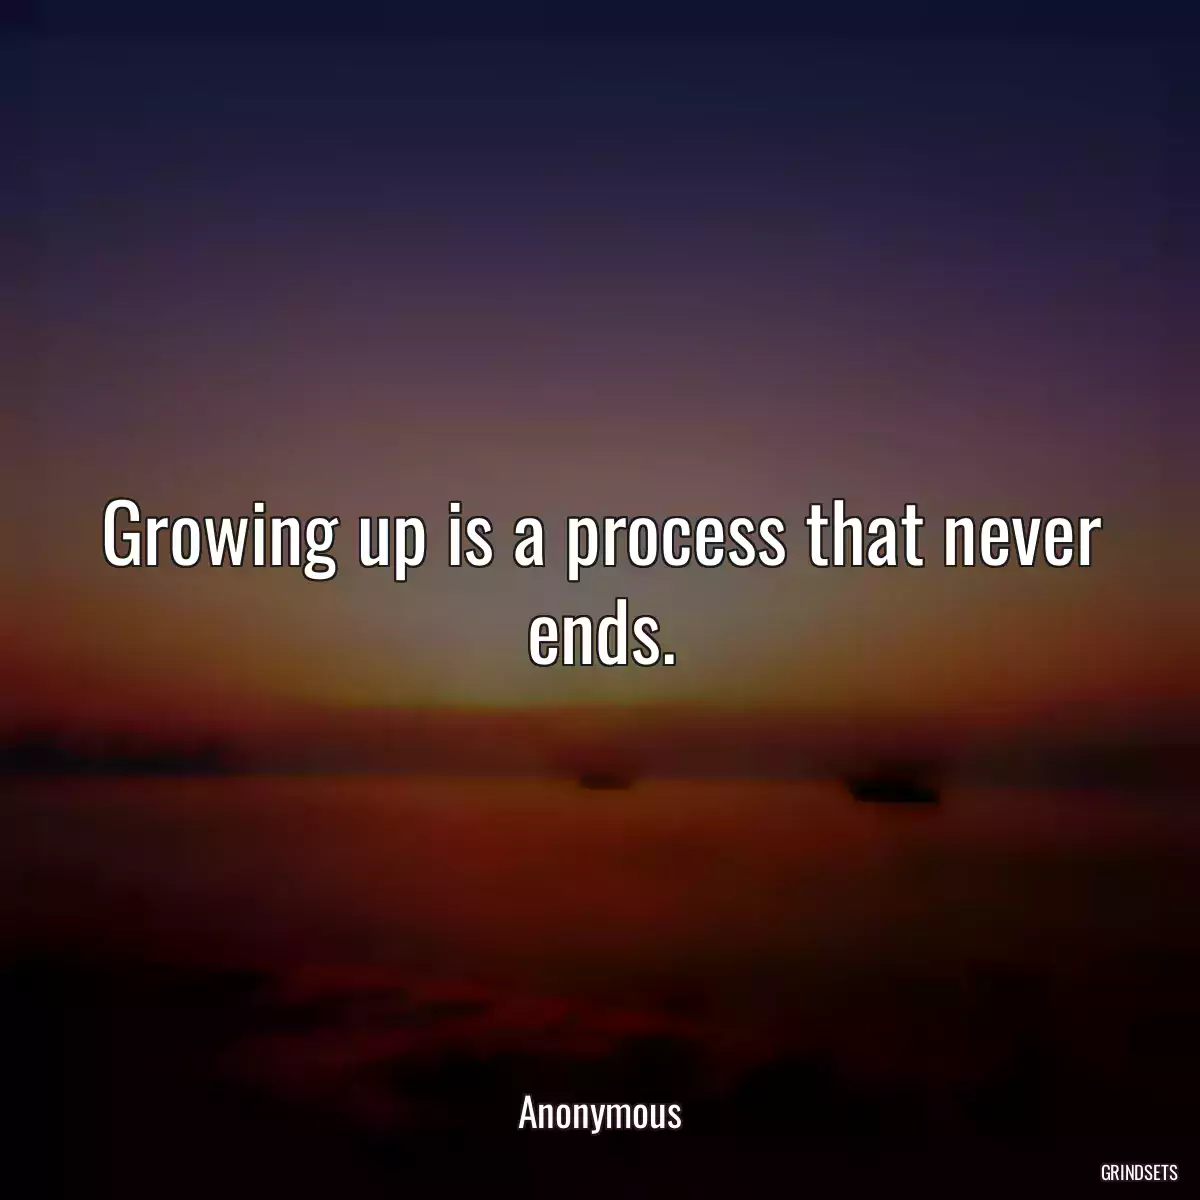 Growing up is a process that never ends.